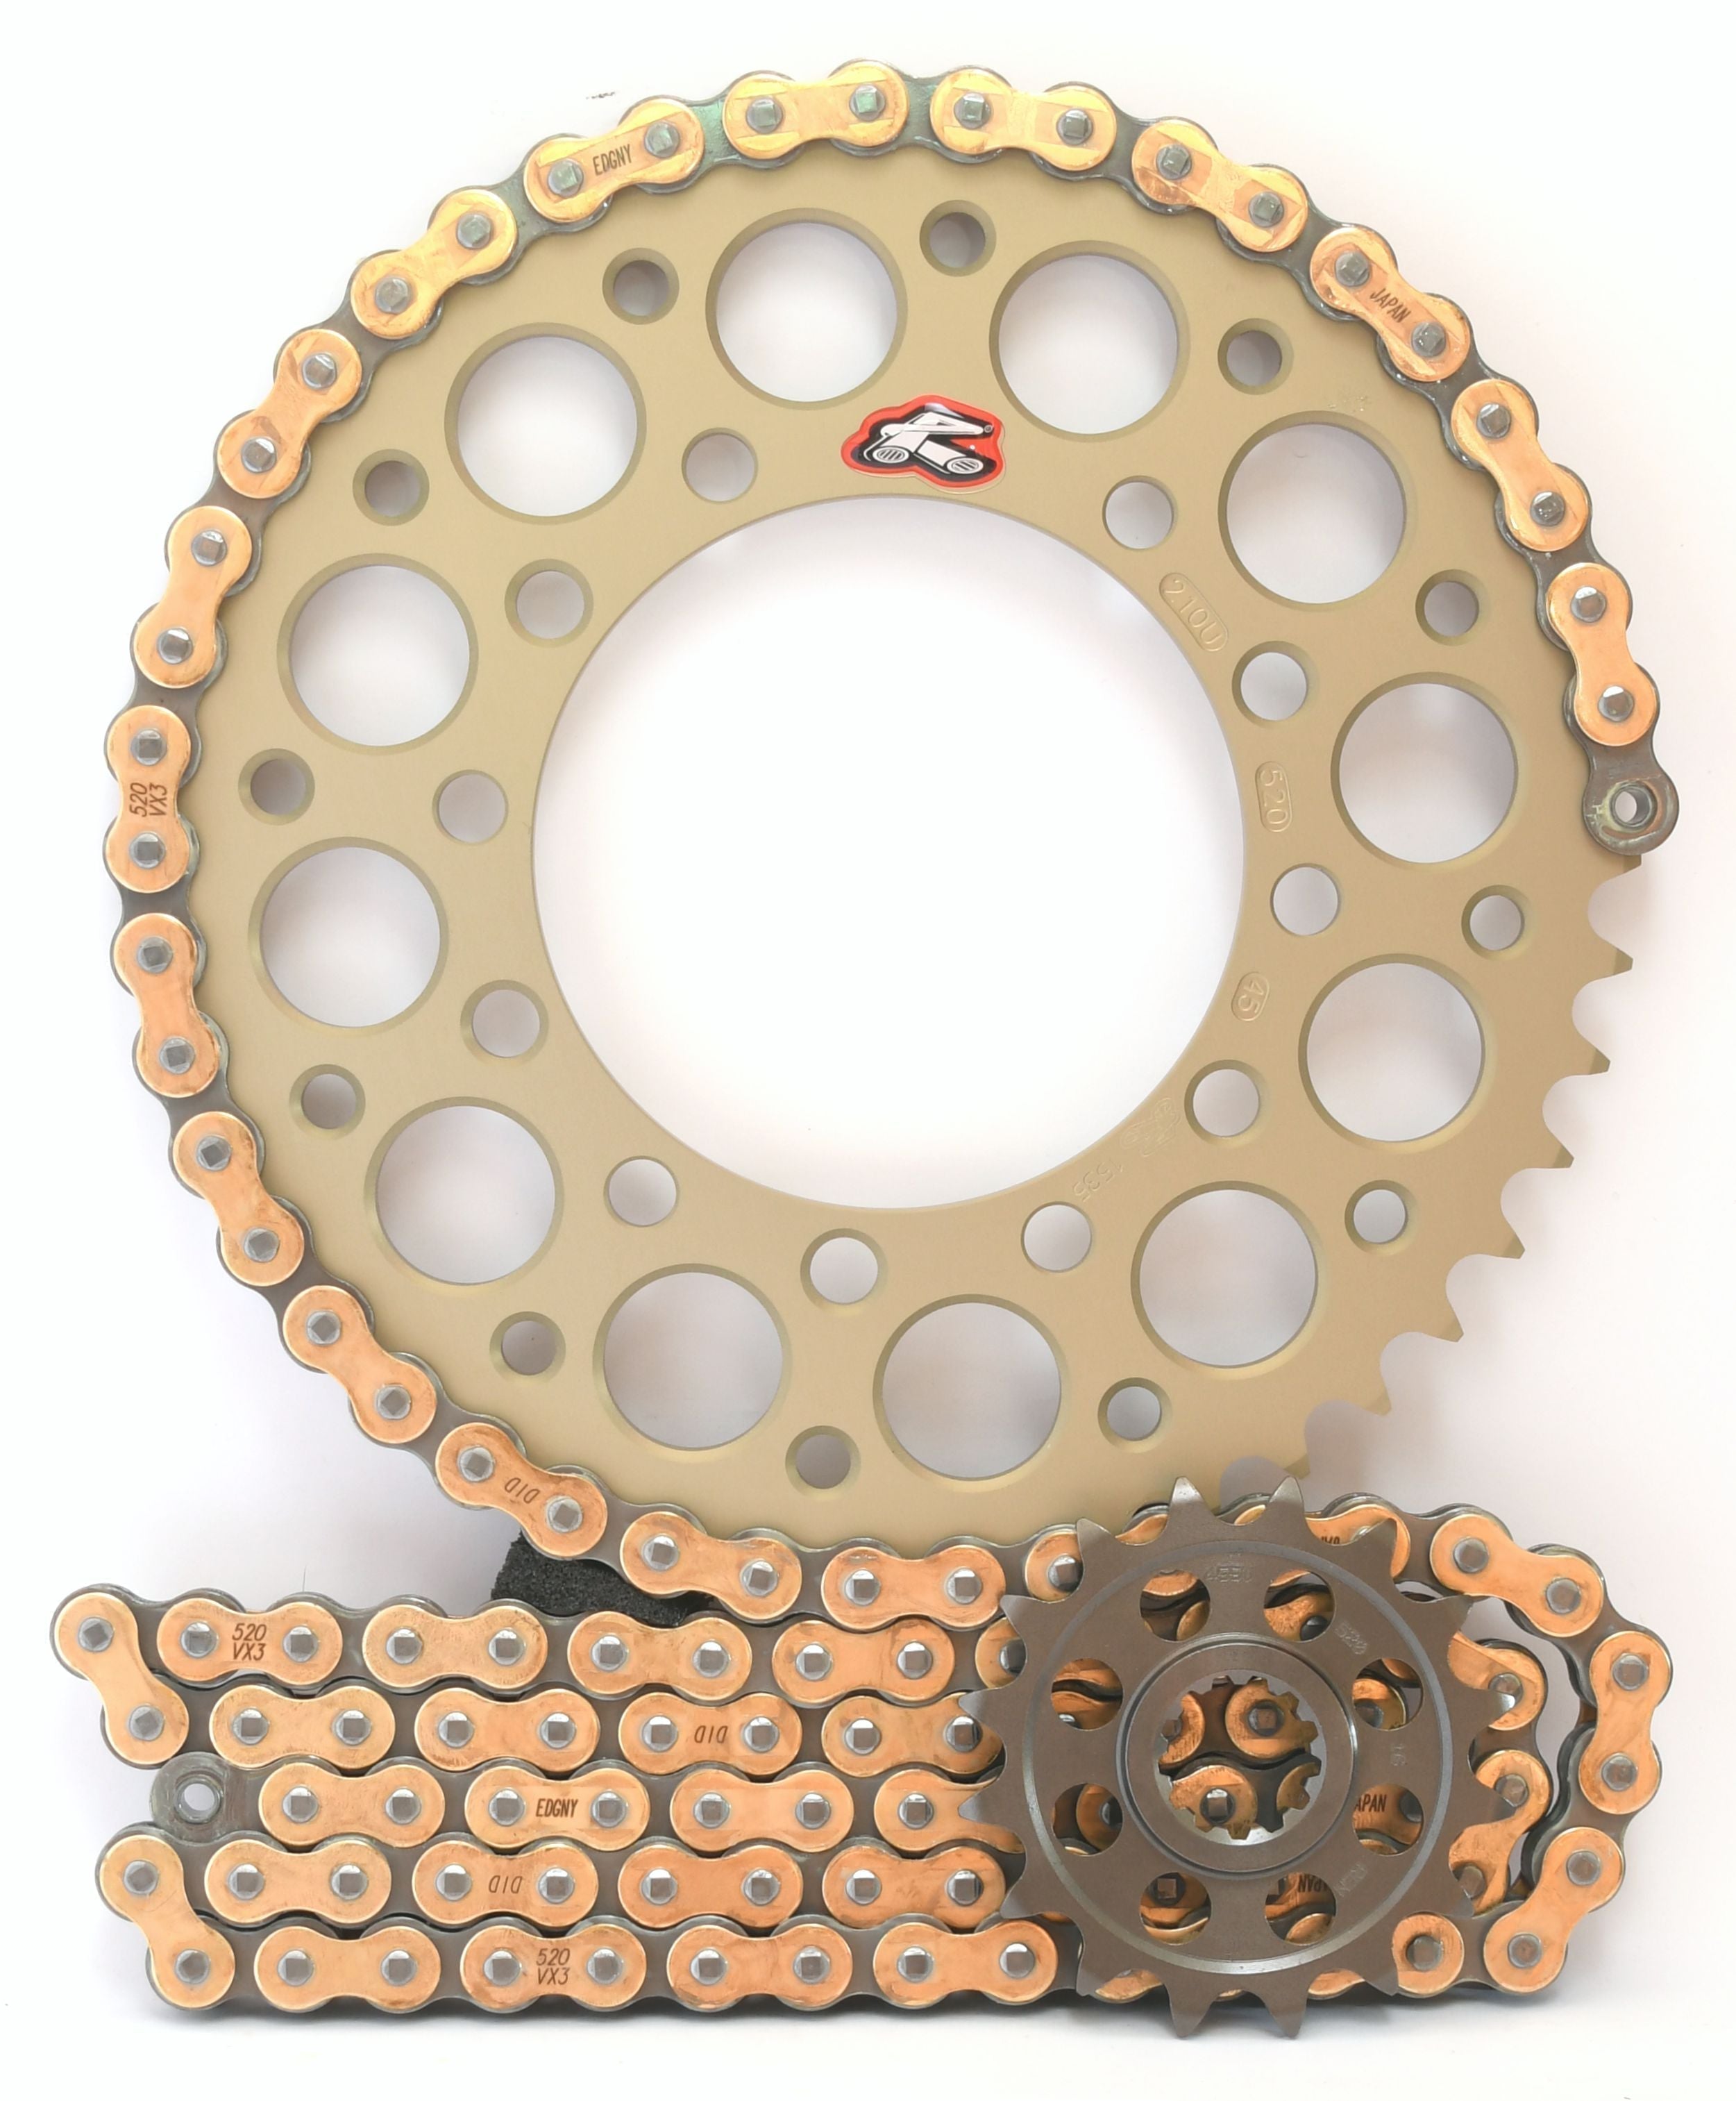 Renthal Ultralight and DID Chain & Sprocket Kit 520 Conversion for GSX-R600 2006-2010 - Standard Gearing